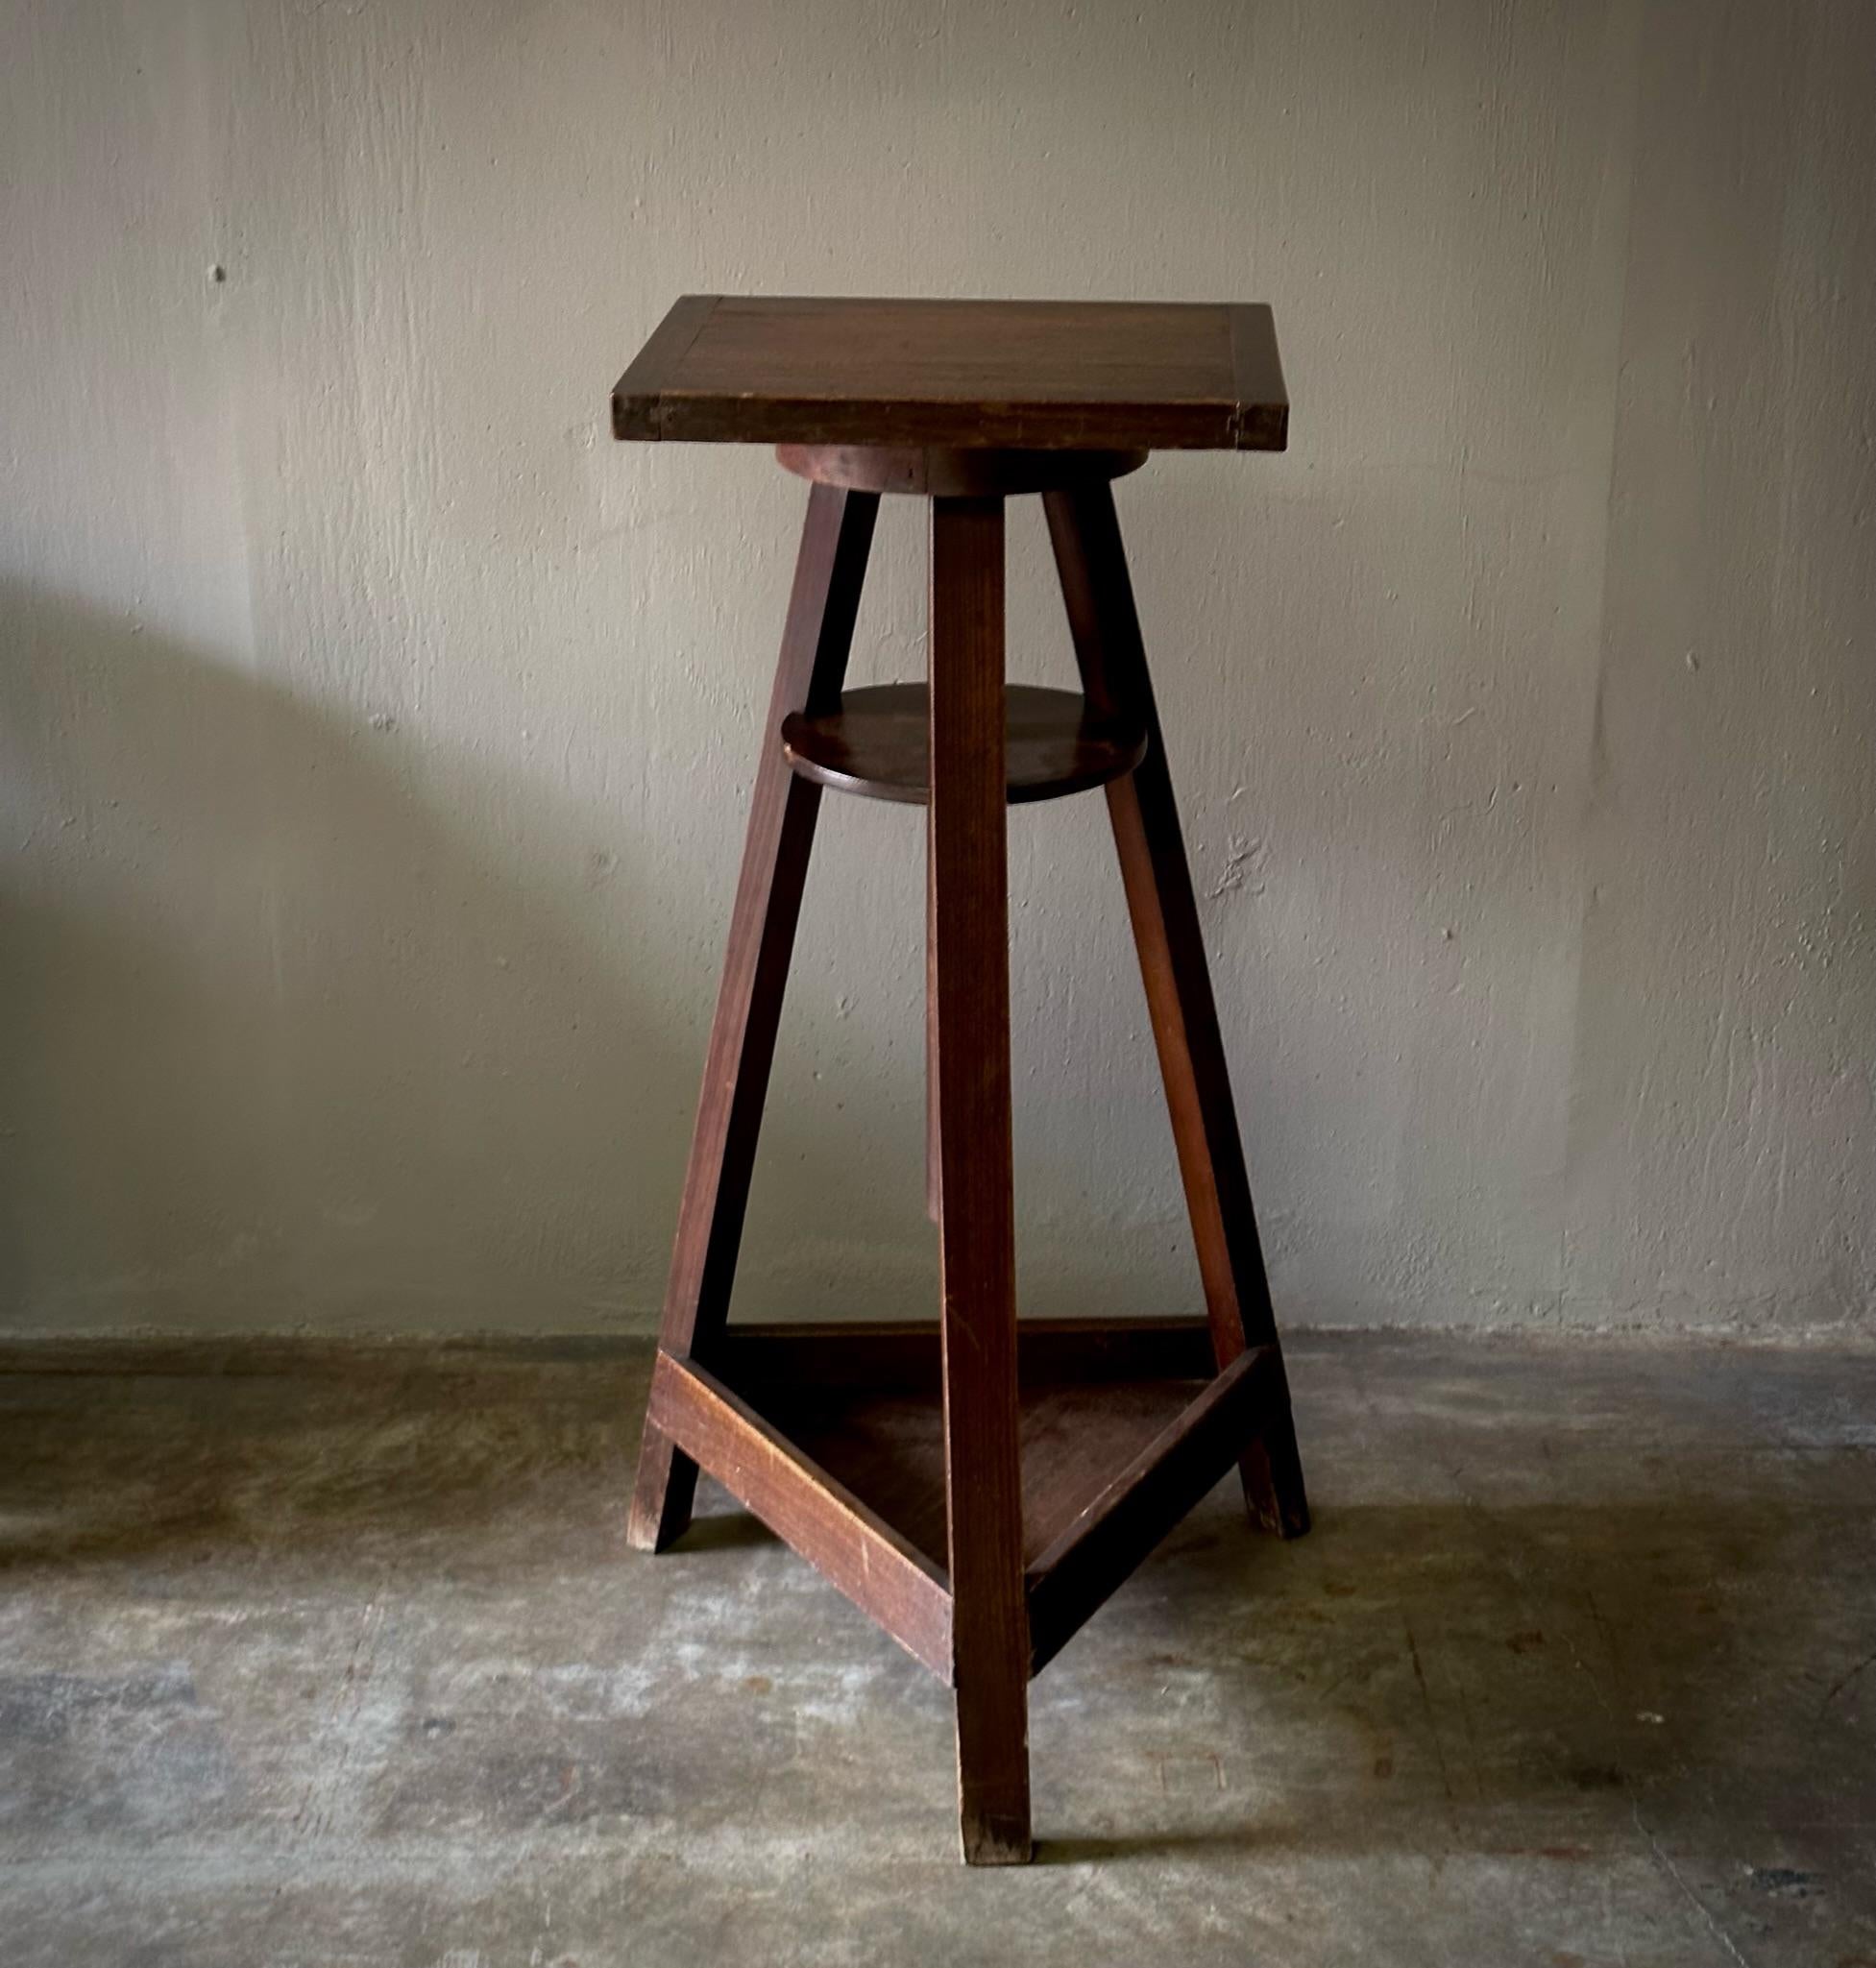 Wooden artist's pedestal produced for turn of the century French sculpture studio. Features small square top and tripod base with two shelves, one circular at the top and one triangular at the bottom. A quirky yet subdued piece, perfect for the